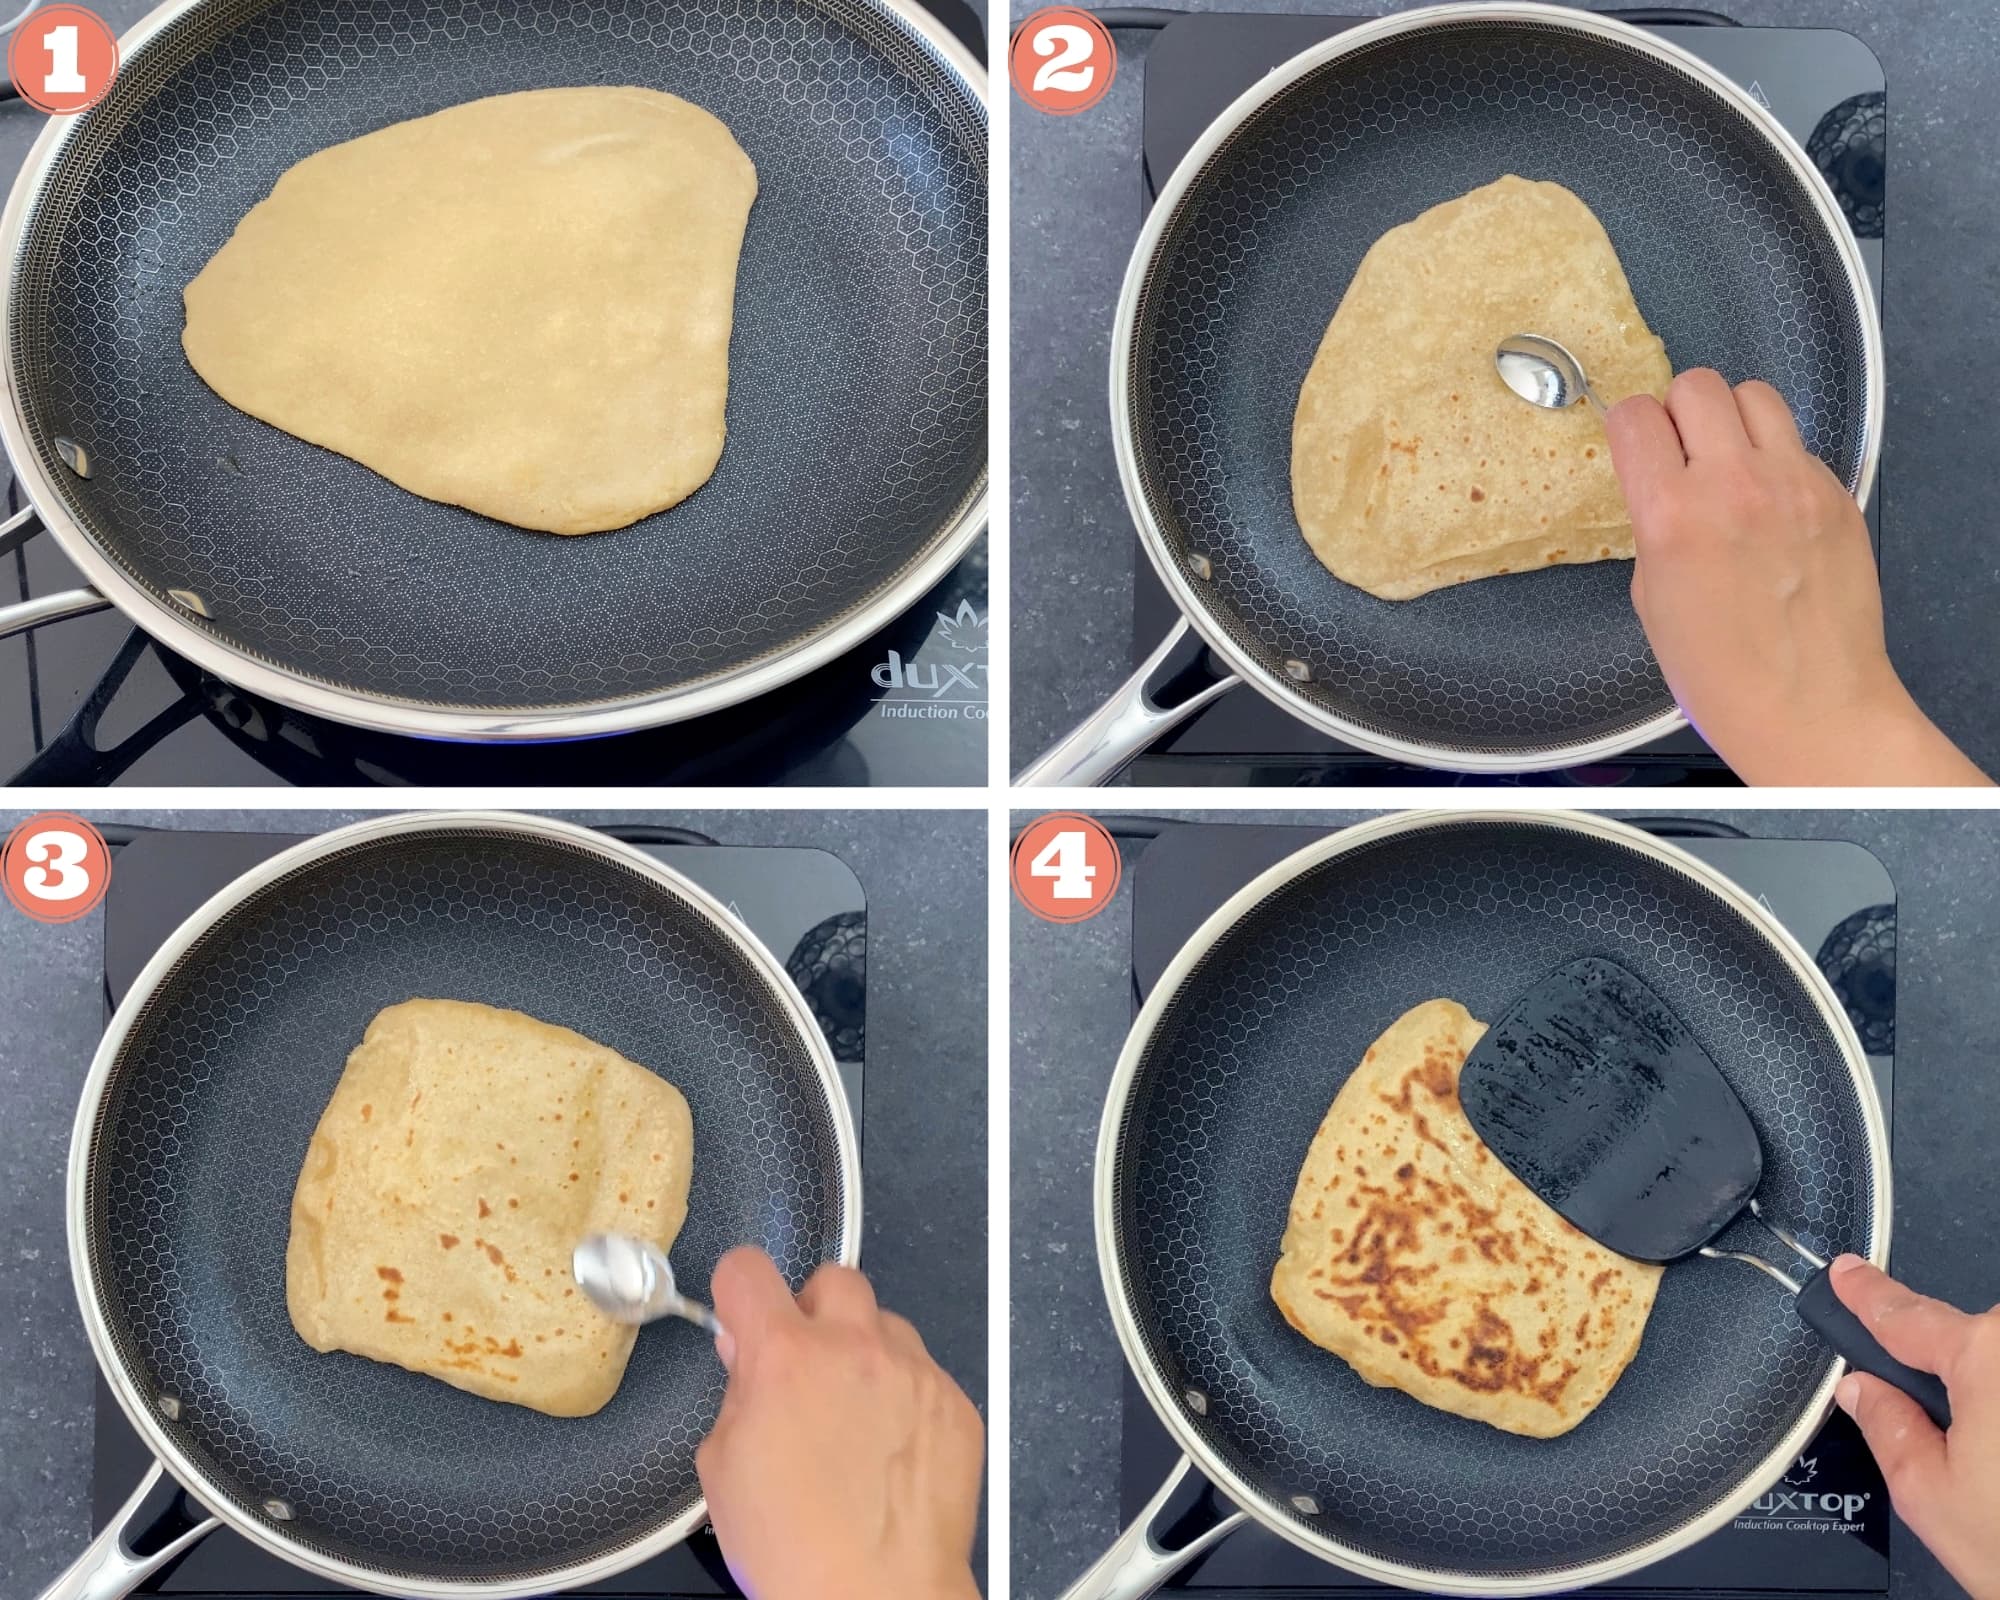 4-image grid showing how to cook paratha in a skillet